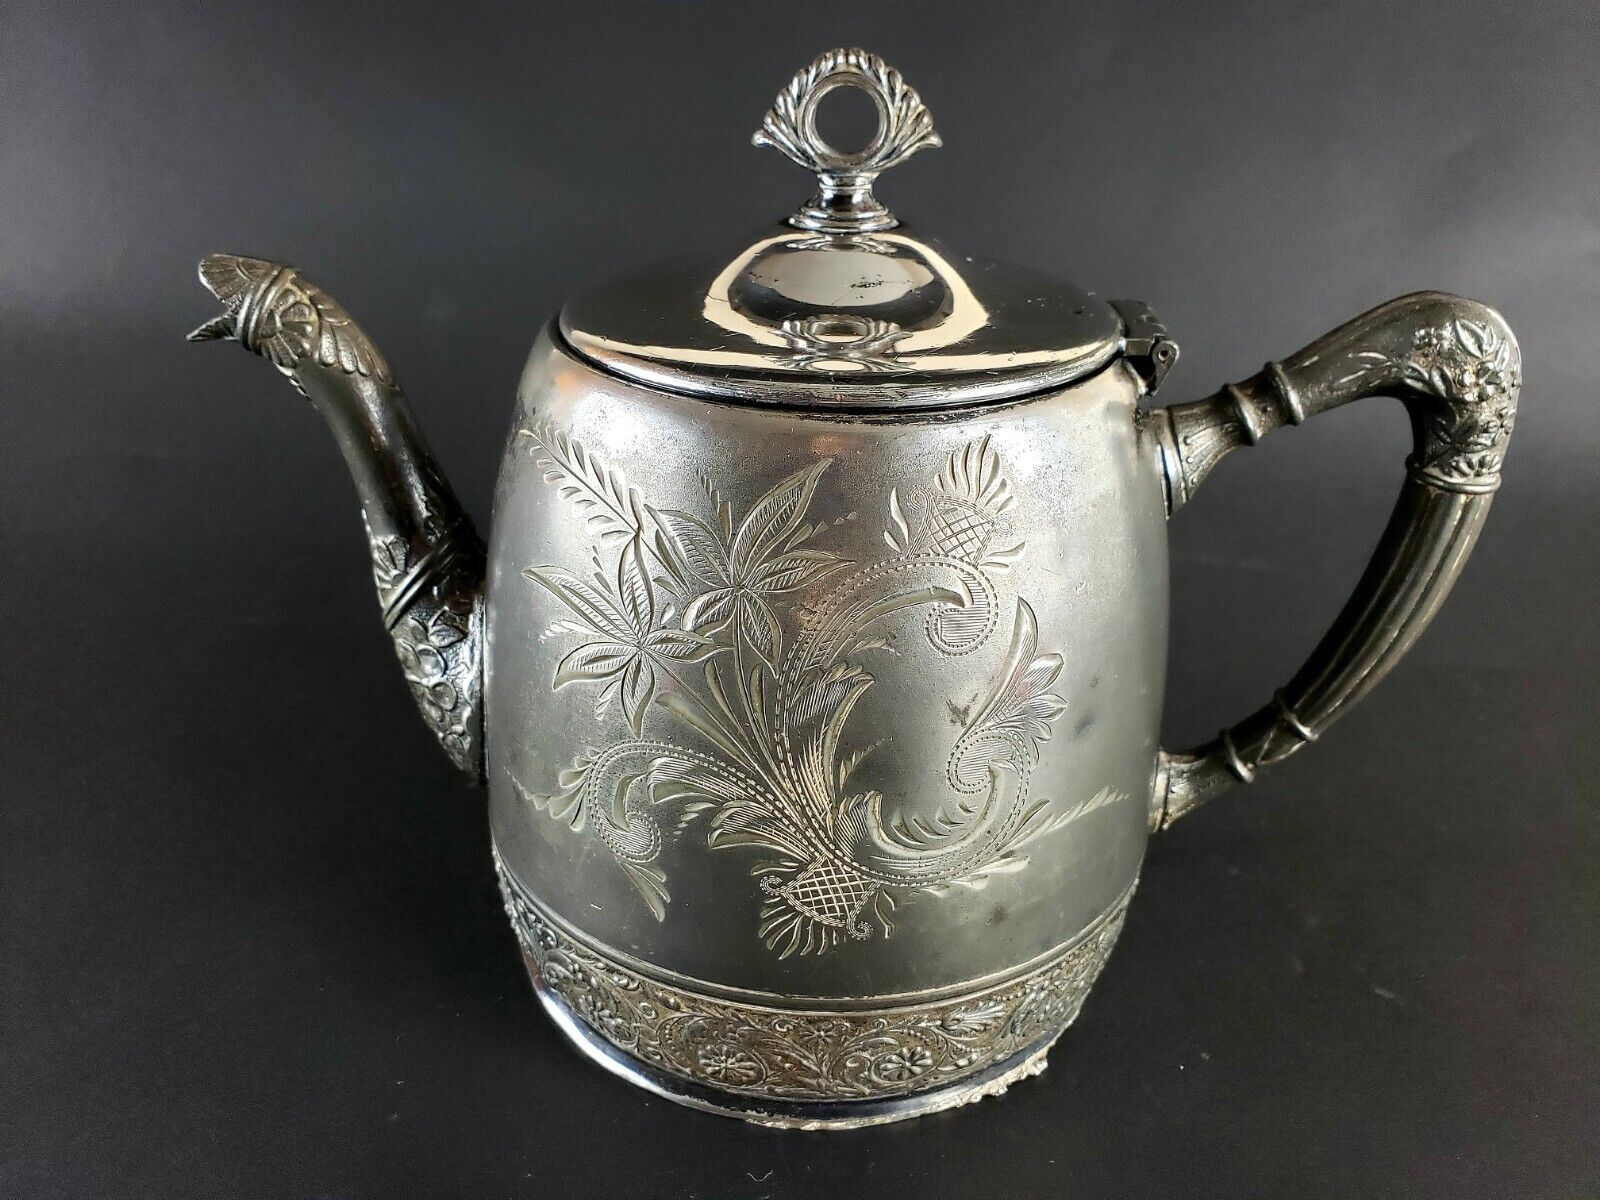 Animer Free Shipping Cheap Bargain Gift and price revision Vintage Silverplate Teapot Hicks Philadelphia Esthetic Silver Co